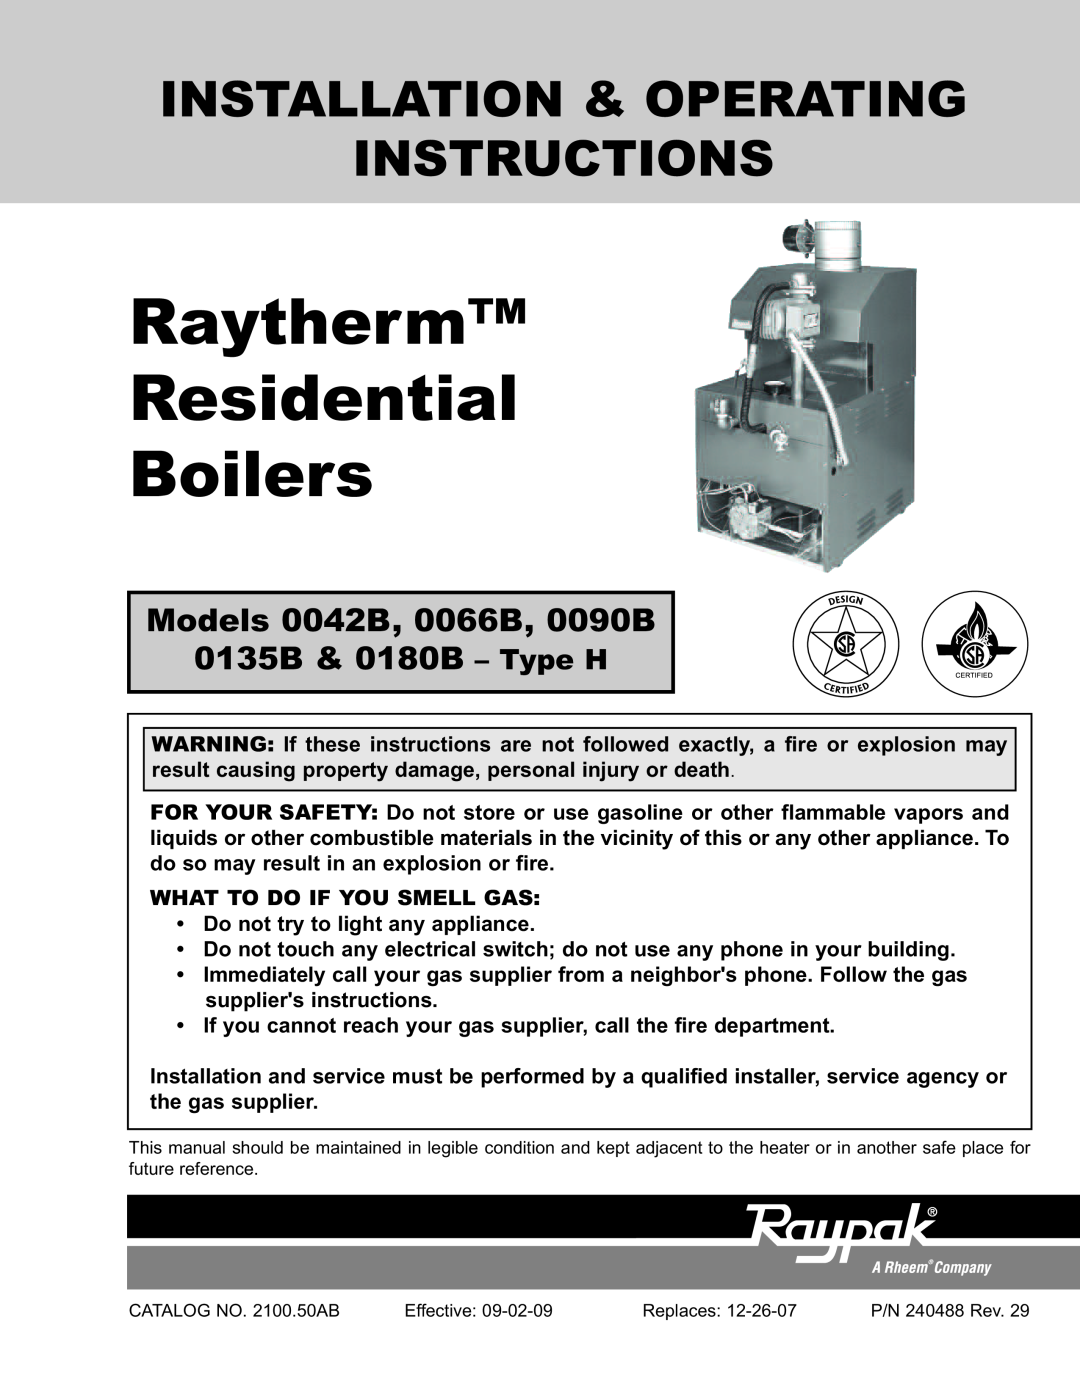 Raypak manual Models 0042B, 0066B, 0090B 0135B & 0180B - Type H, What To Do If You Smell Gas 